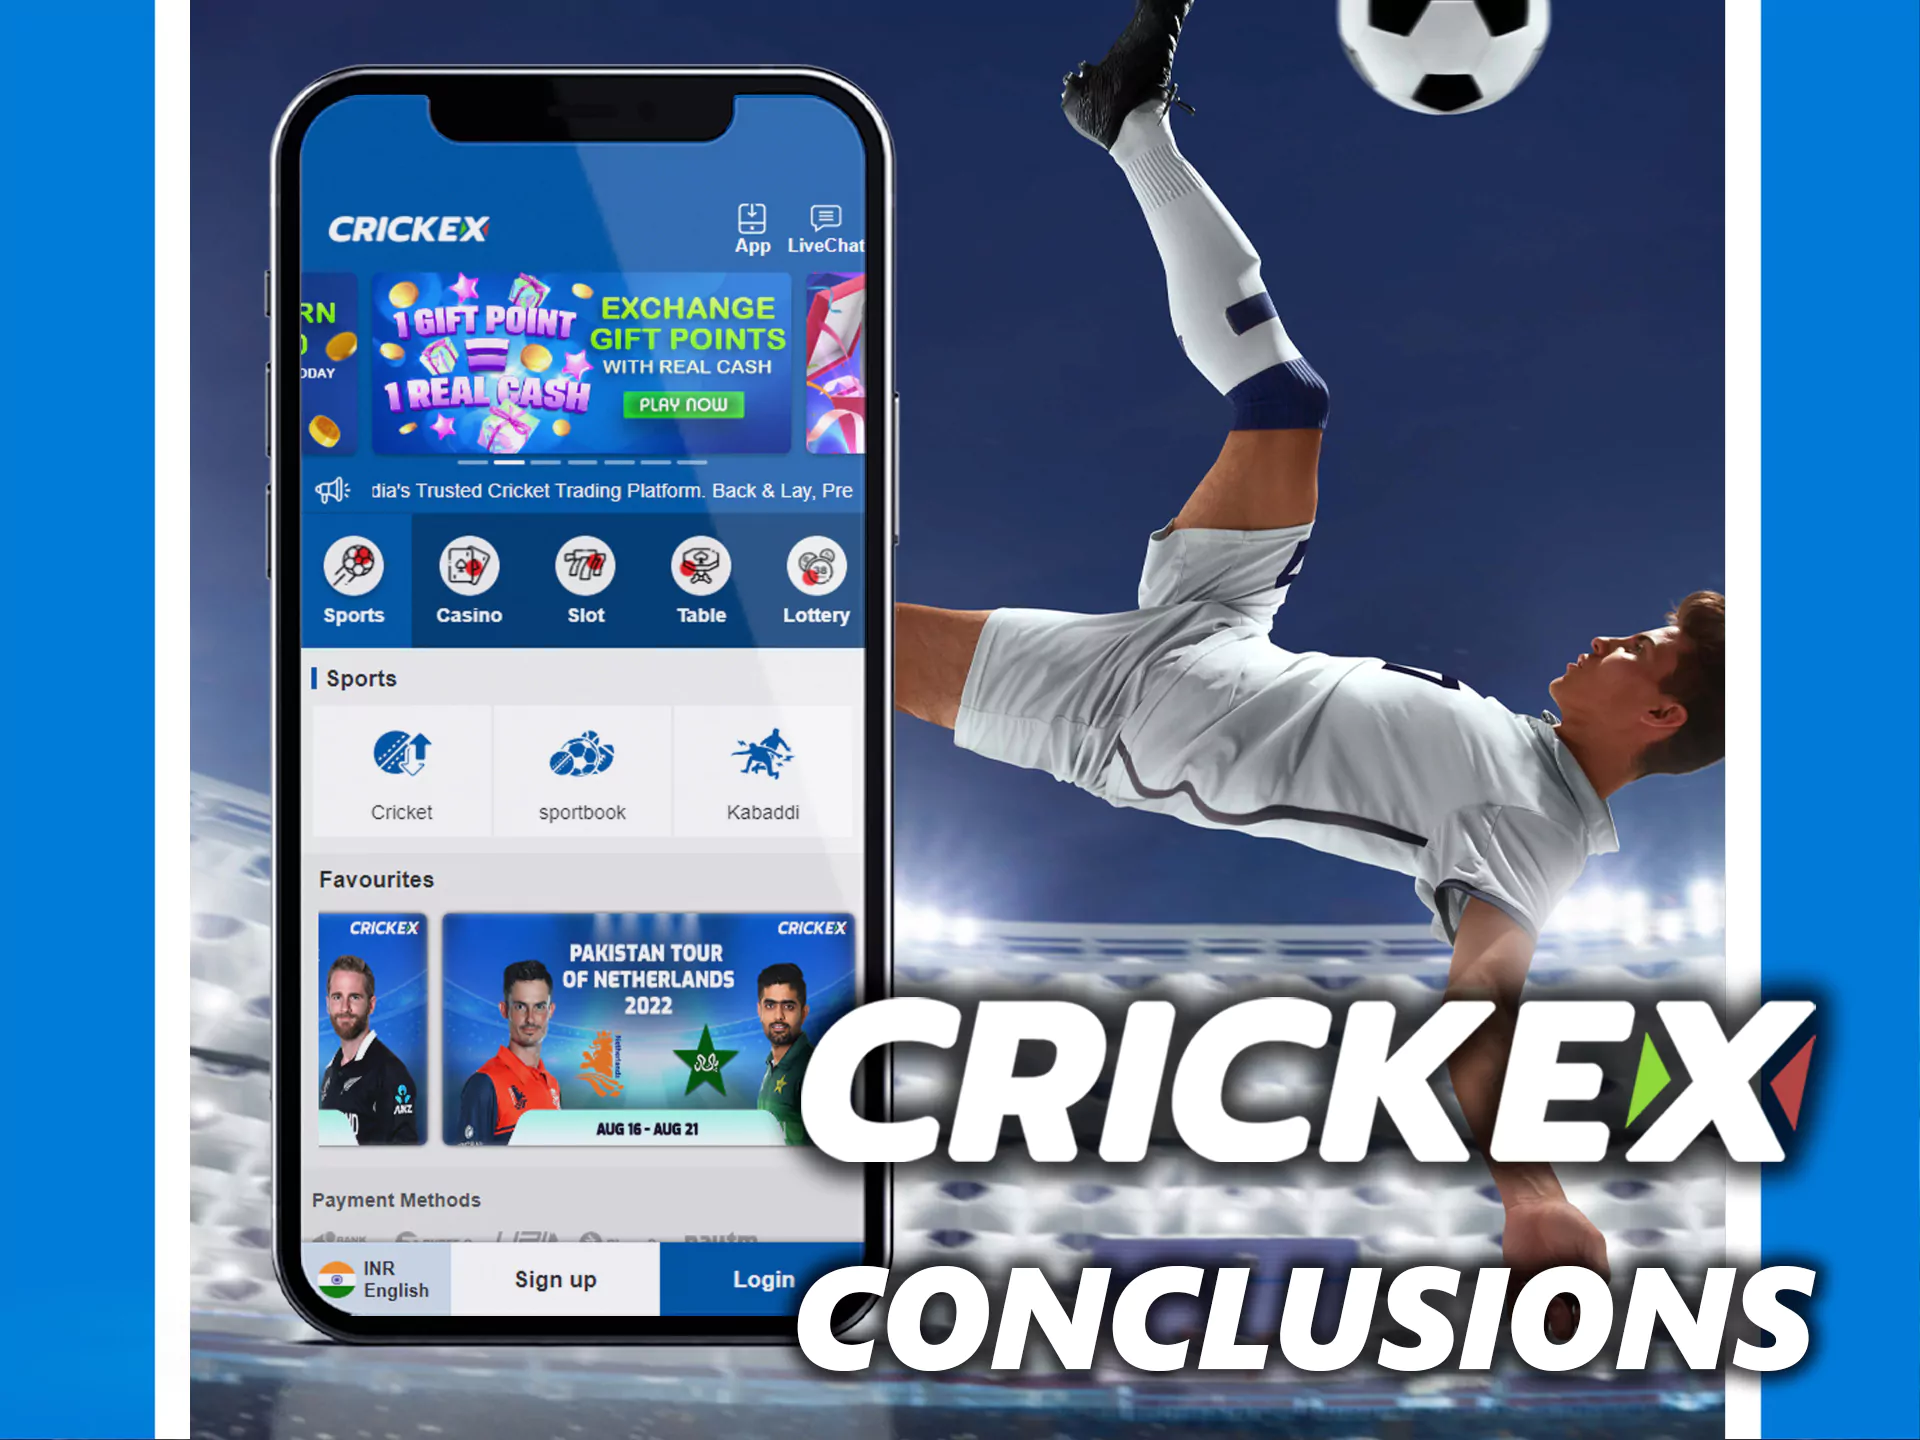 The Crickex app is great for online sports betting.